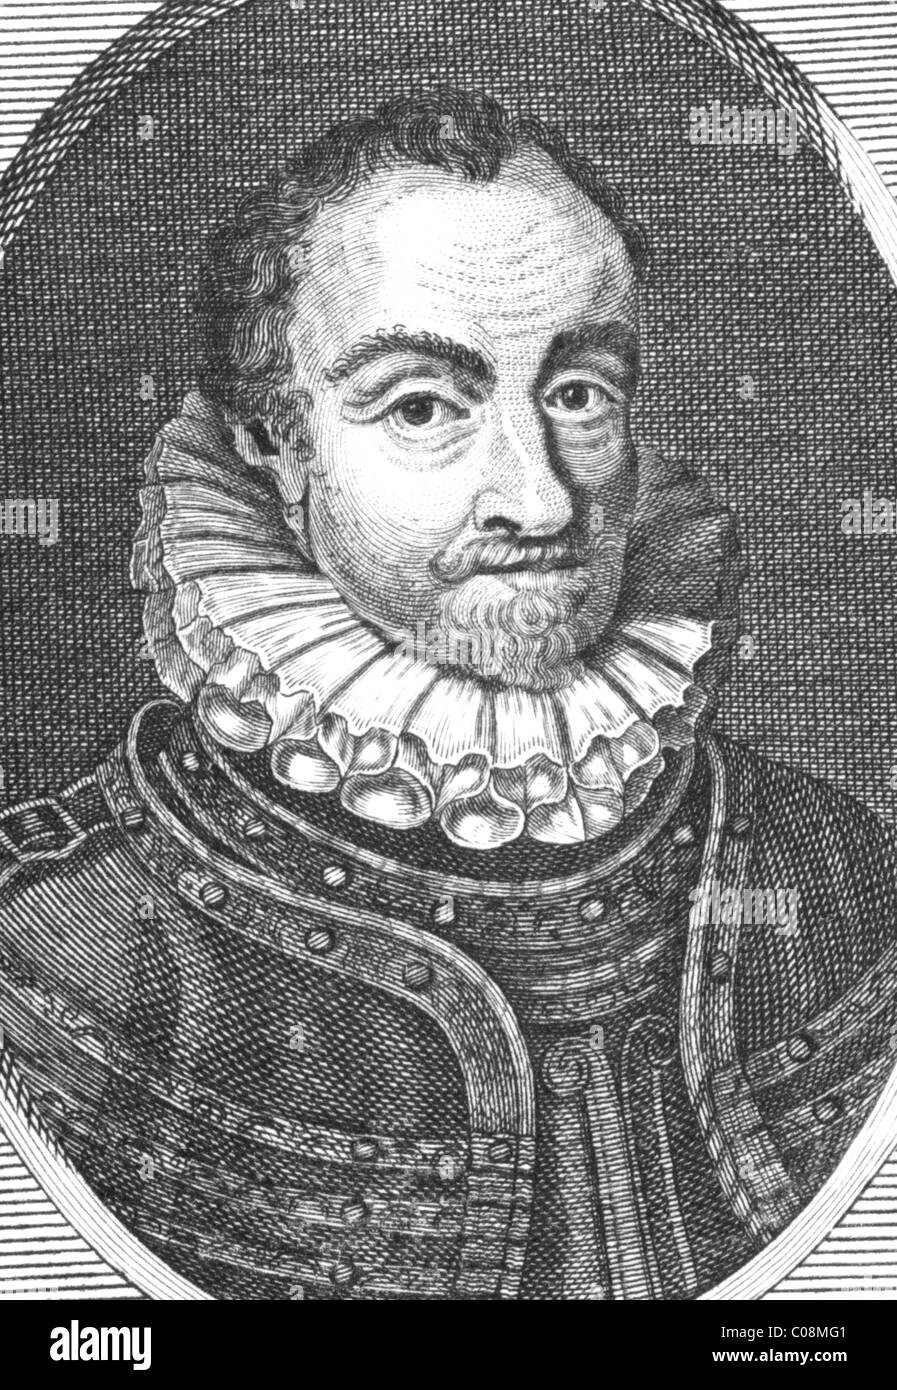 William I, Prince of Orange aka William the Silent (1533-1584) on engraving from the 1800s. Stock Photo